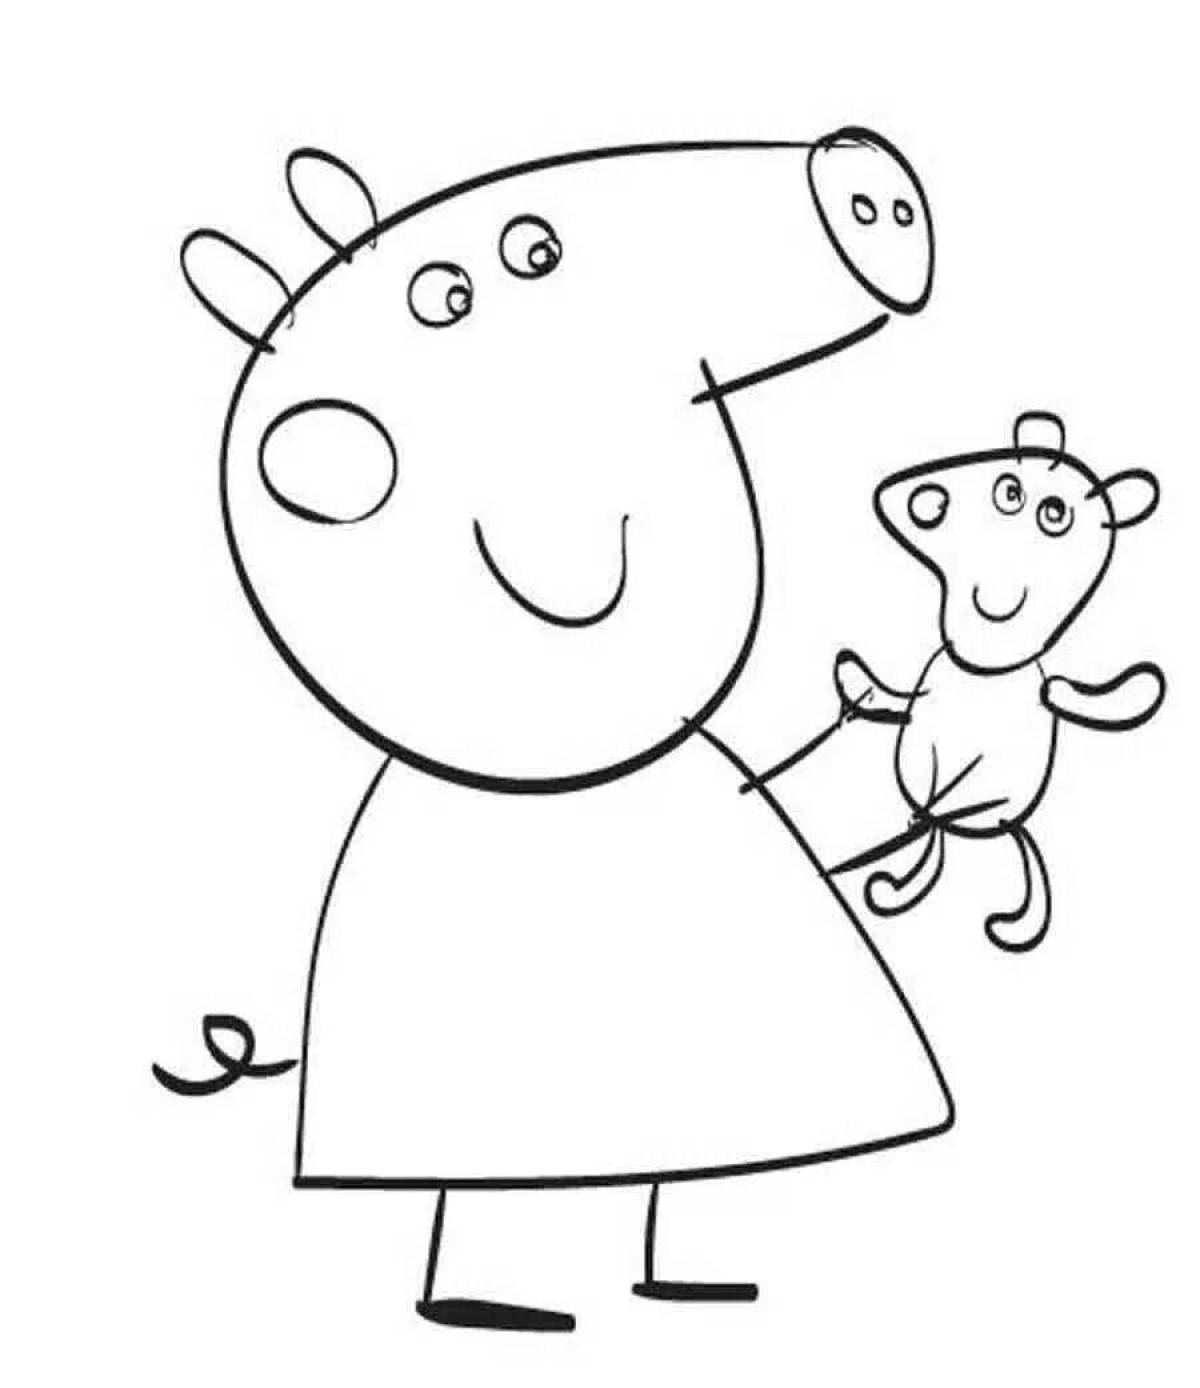 Great peppa pig coloring book for kids